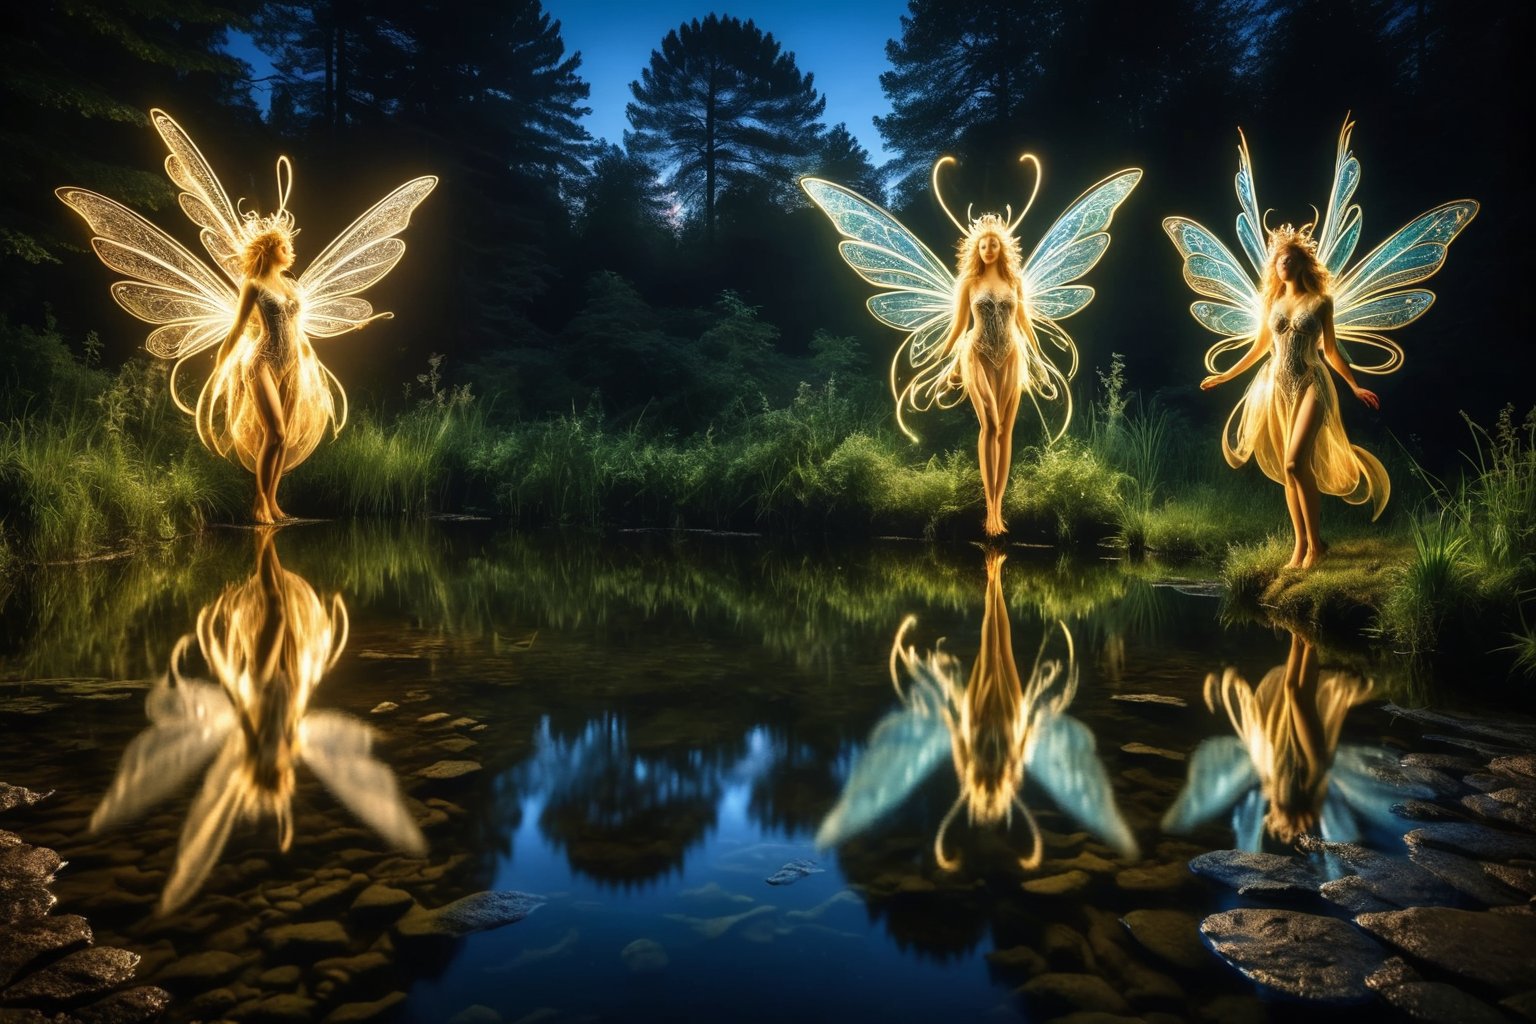 A group of water faeries gliding over a pond, reflections in the water, night scene. ral-exposure, in the style of double exposure, neon art nouveau, long exposure, 